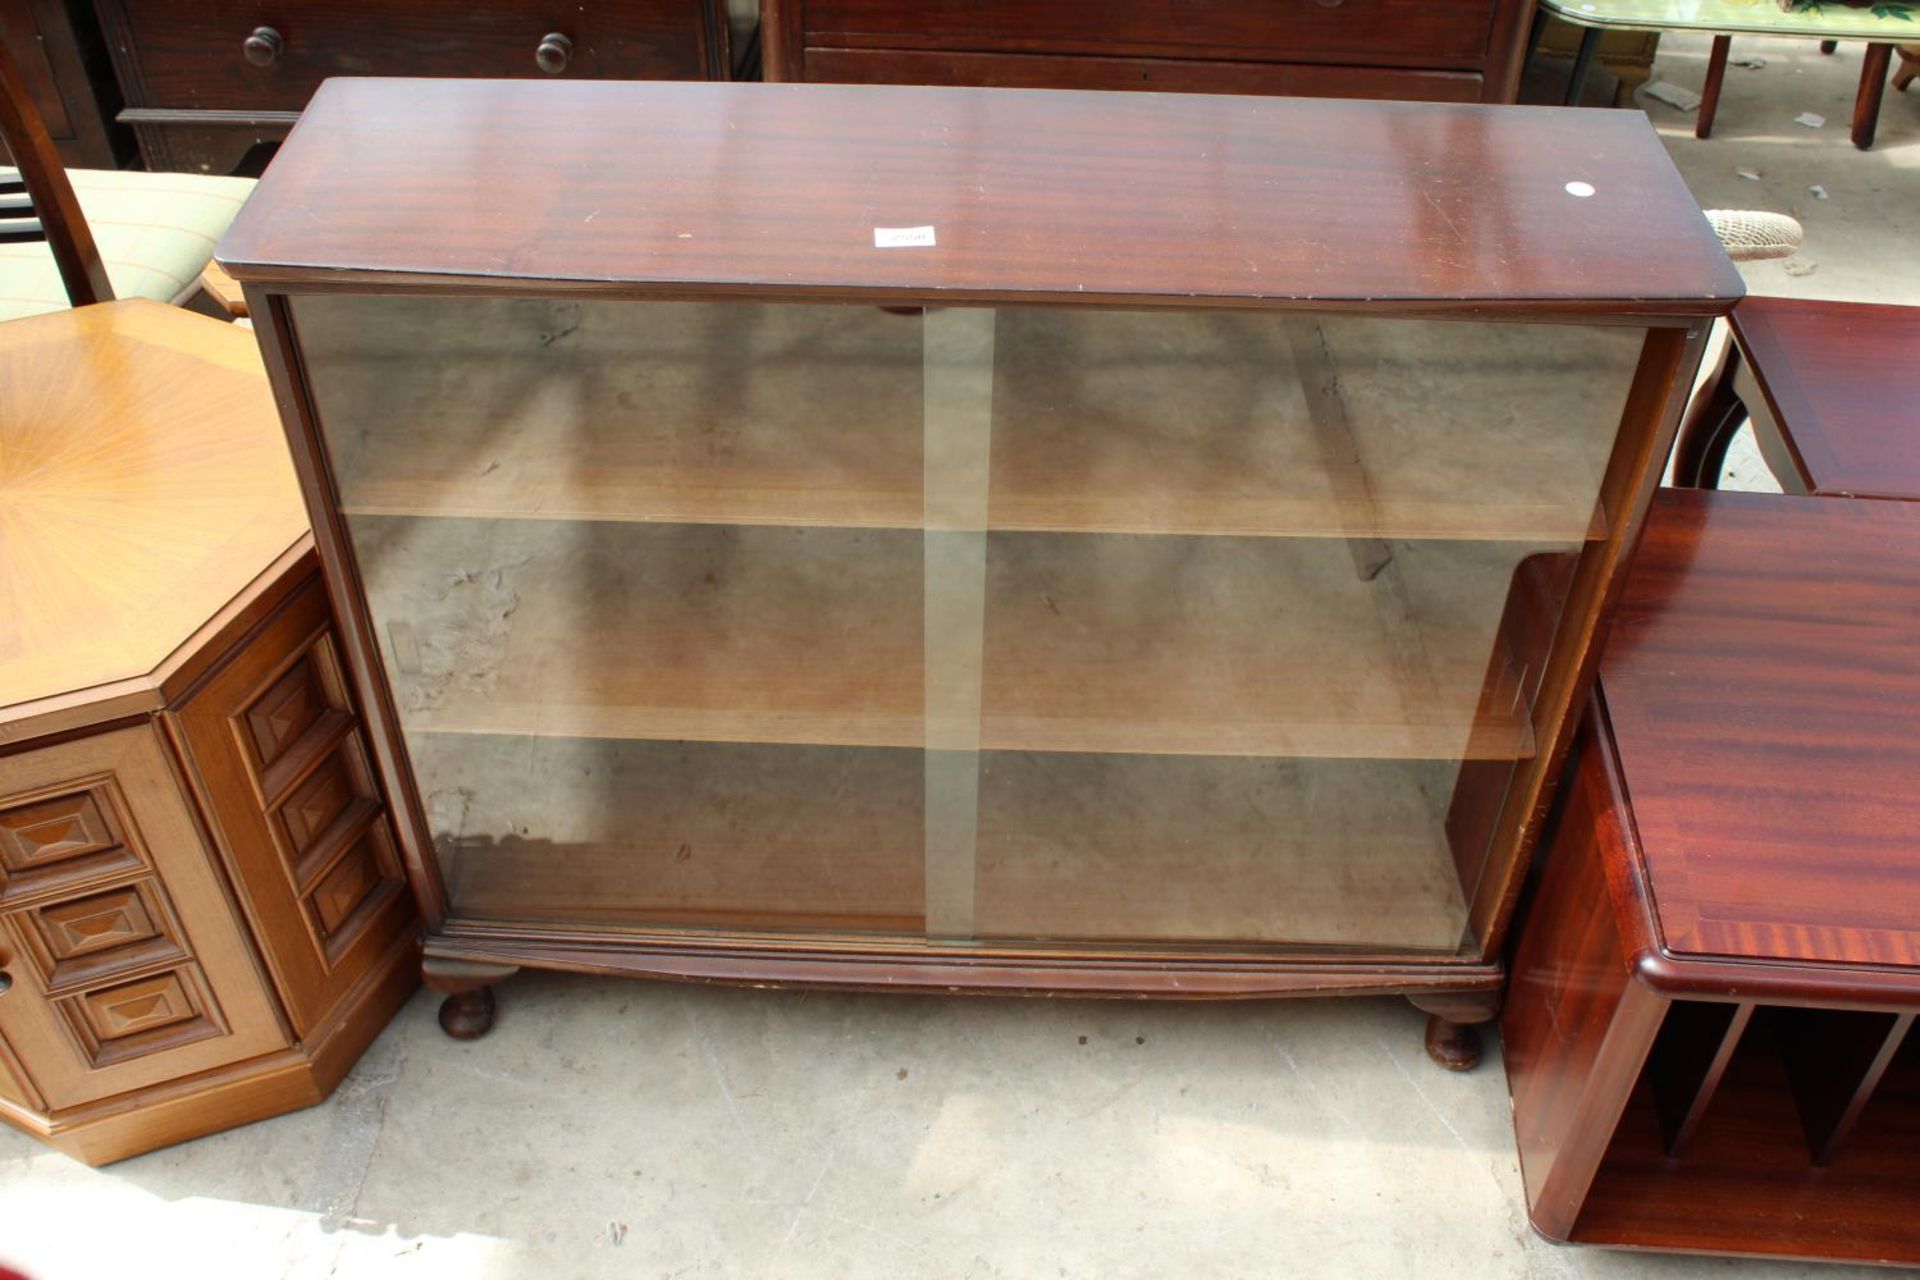 A MID 20TH CENTURY MAHOGANY BOOKCASE WITH 2 GLASS SLIDING DOORS ON CABRIOLE LEGS, 39" WIDE